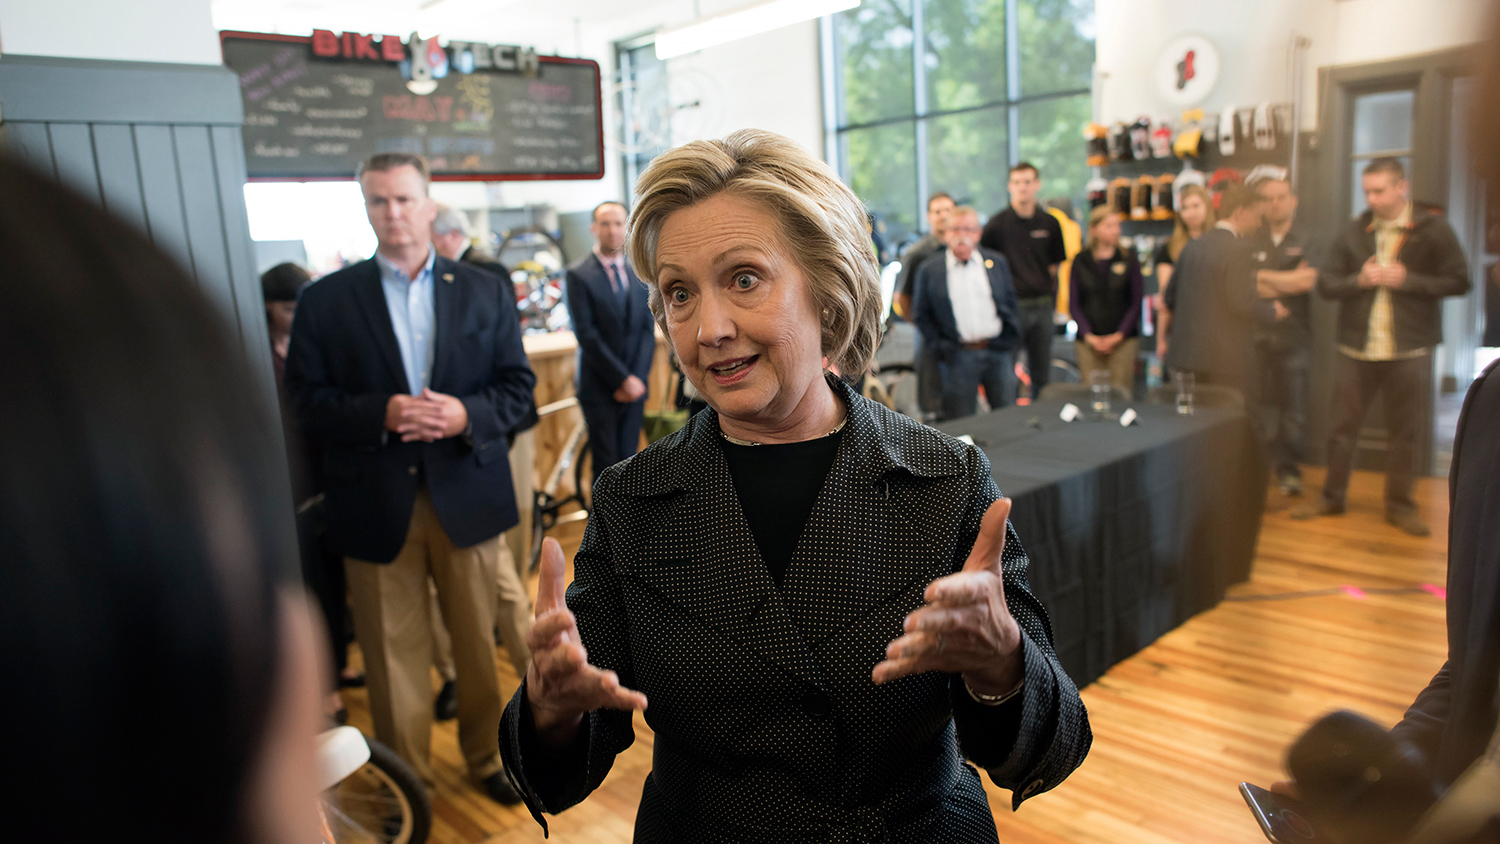 Hillary Clinton, former secretary of state and U.S. presidential candidate, speaks to reporters following a small business roundtable discussion at Bike Tech in Cedar Falls, Iowa, U.S., on Tuesday, May 19, 2015.
